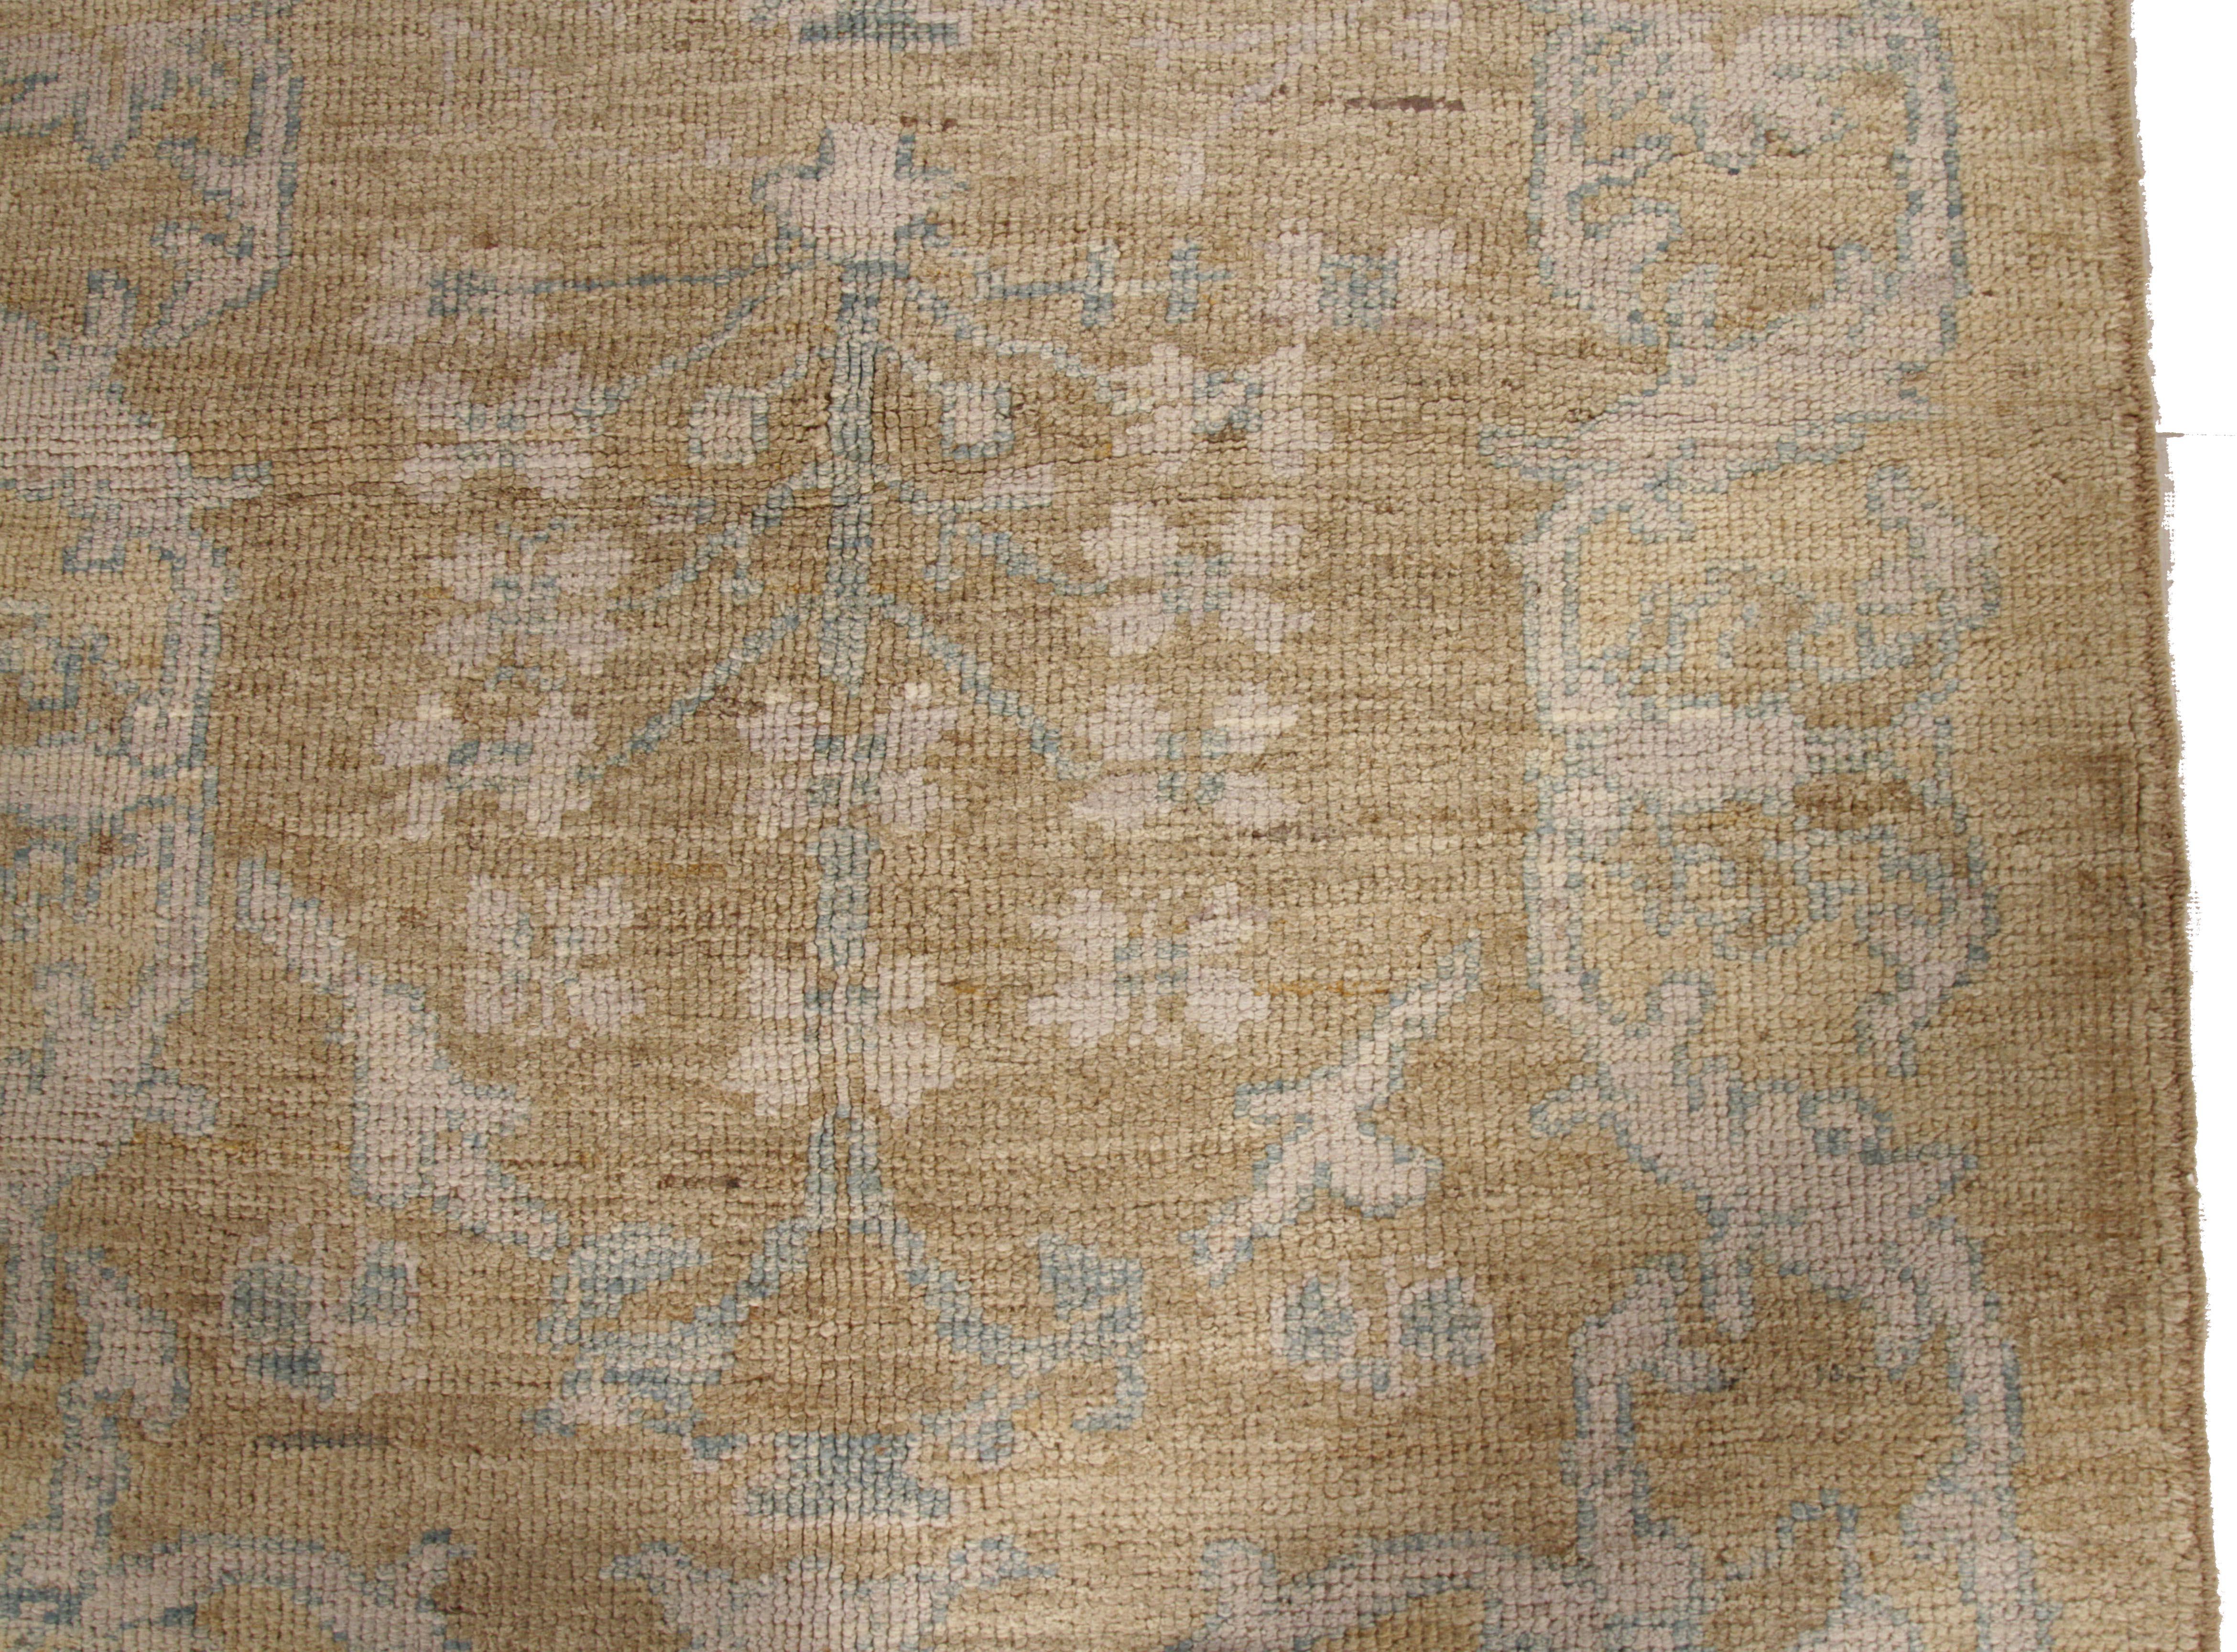 Contemporary Oushak Persian Rug with Ivory Floral Patterns  In New Condition For Sale In Dallas, TX